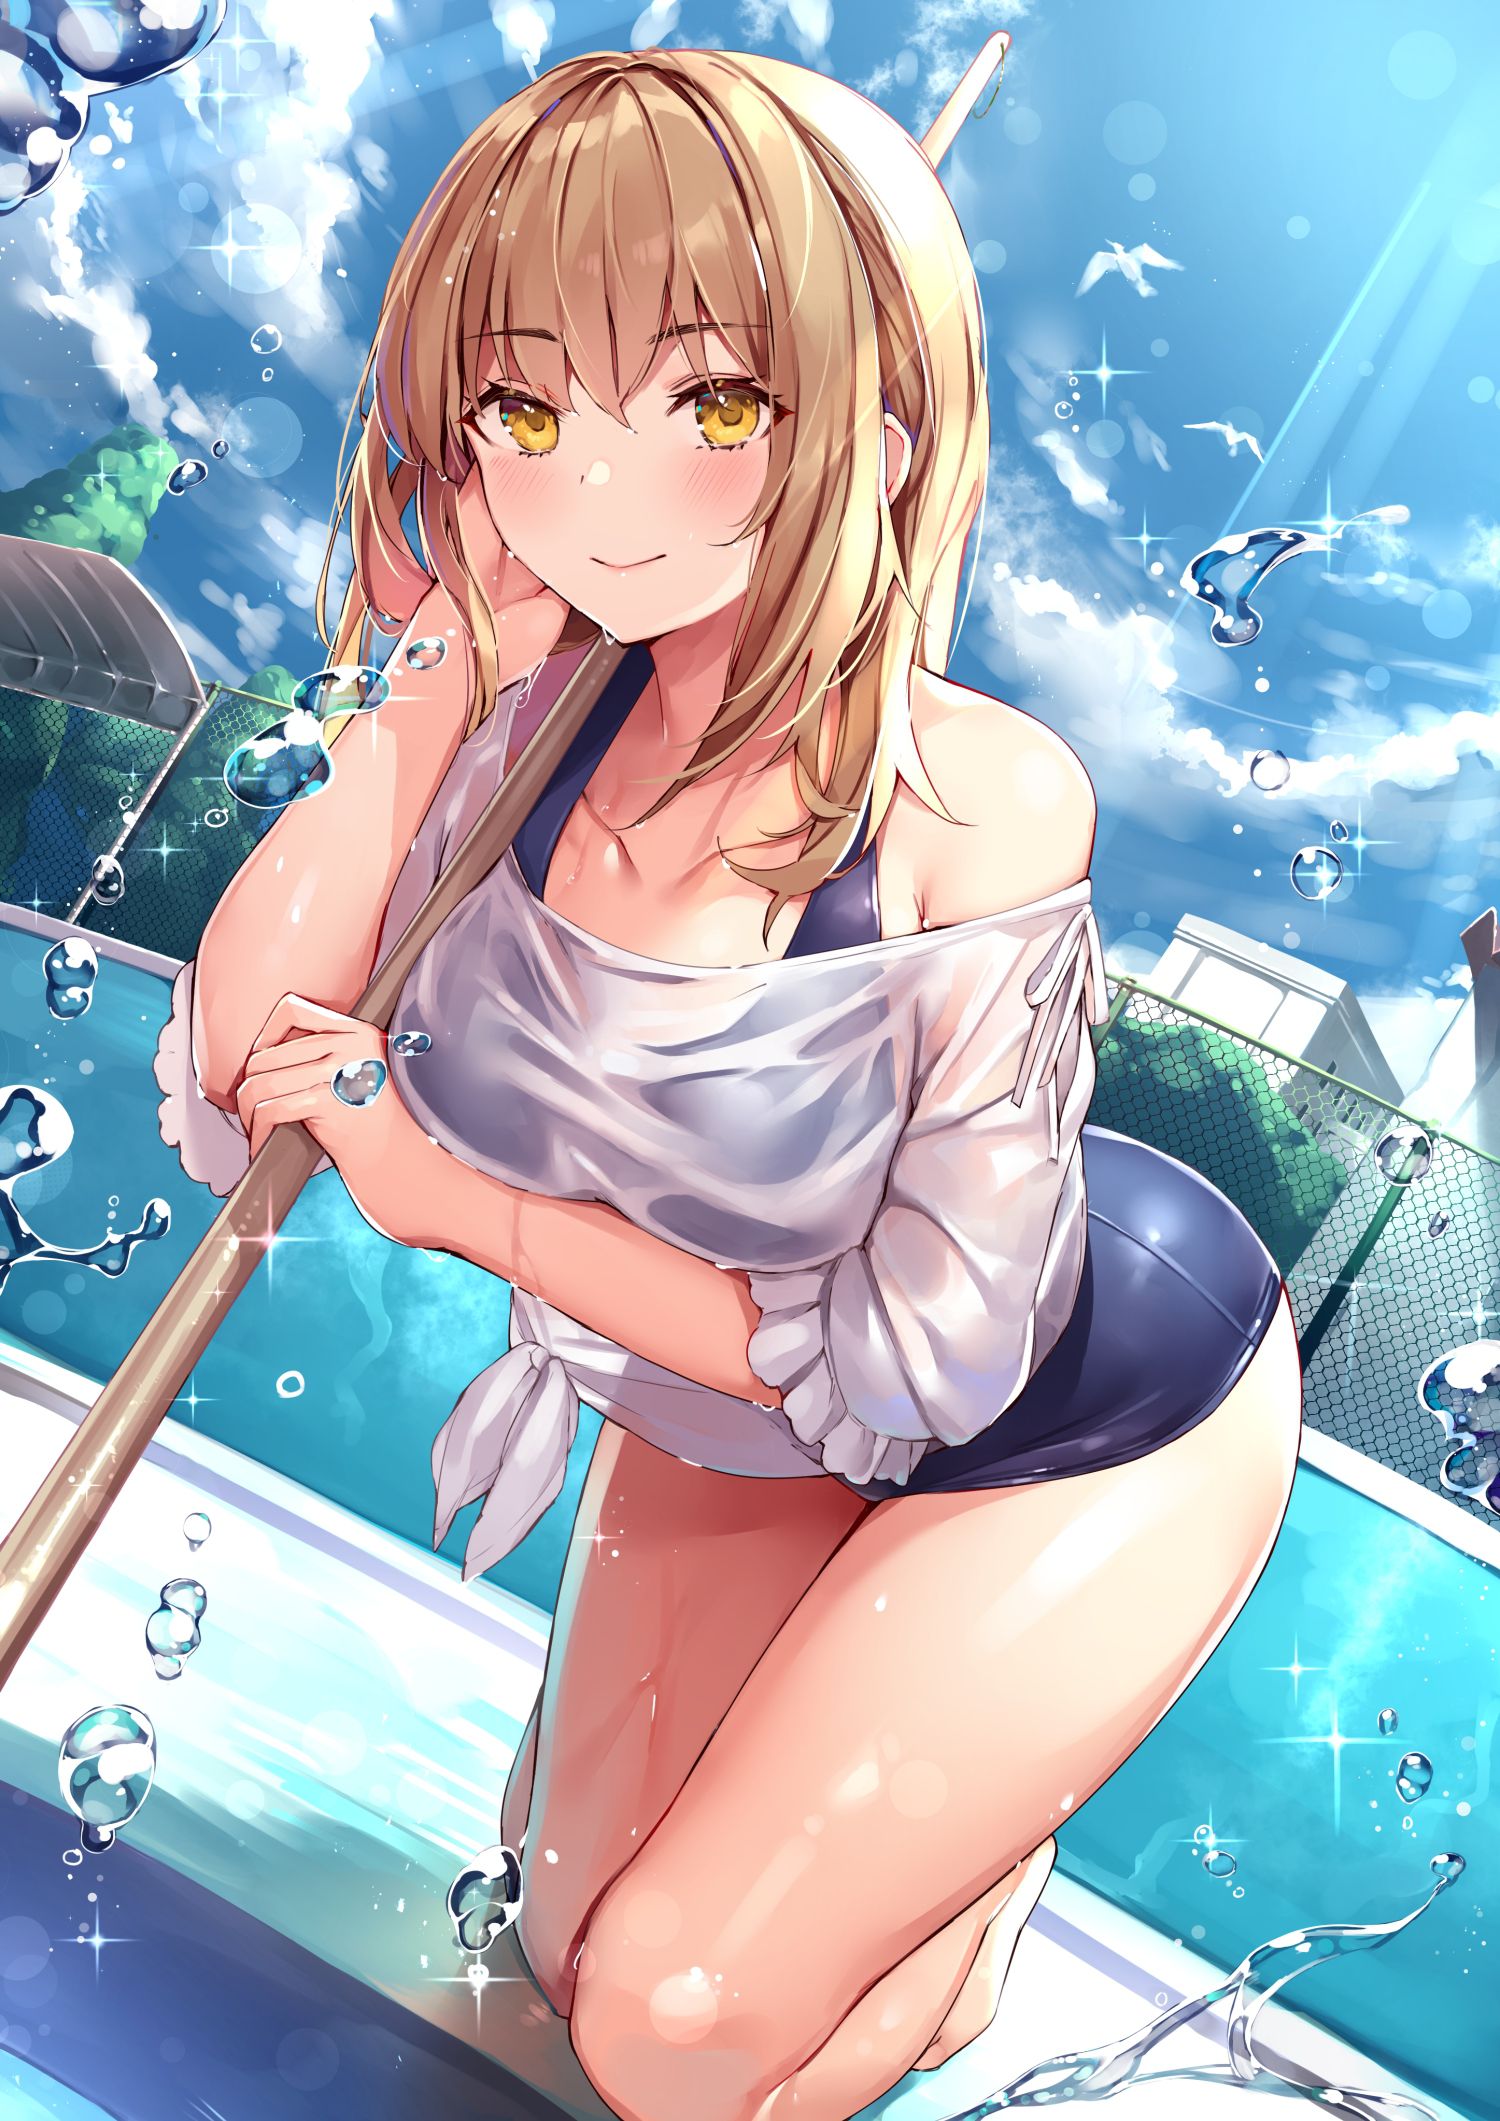 Erotic anime summary Erotic image collection of wet transparent beauties and beautiful girls that are variously transparent [50 sheets] 20